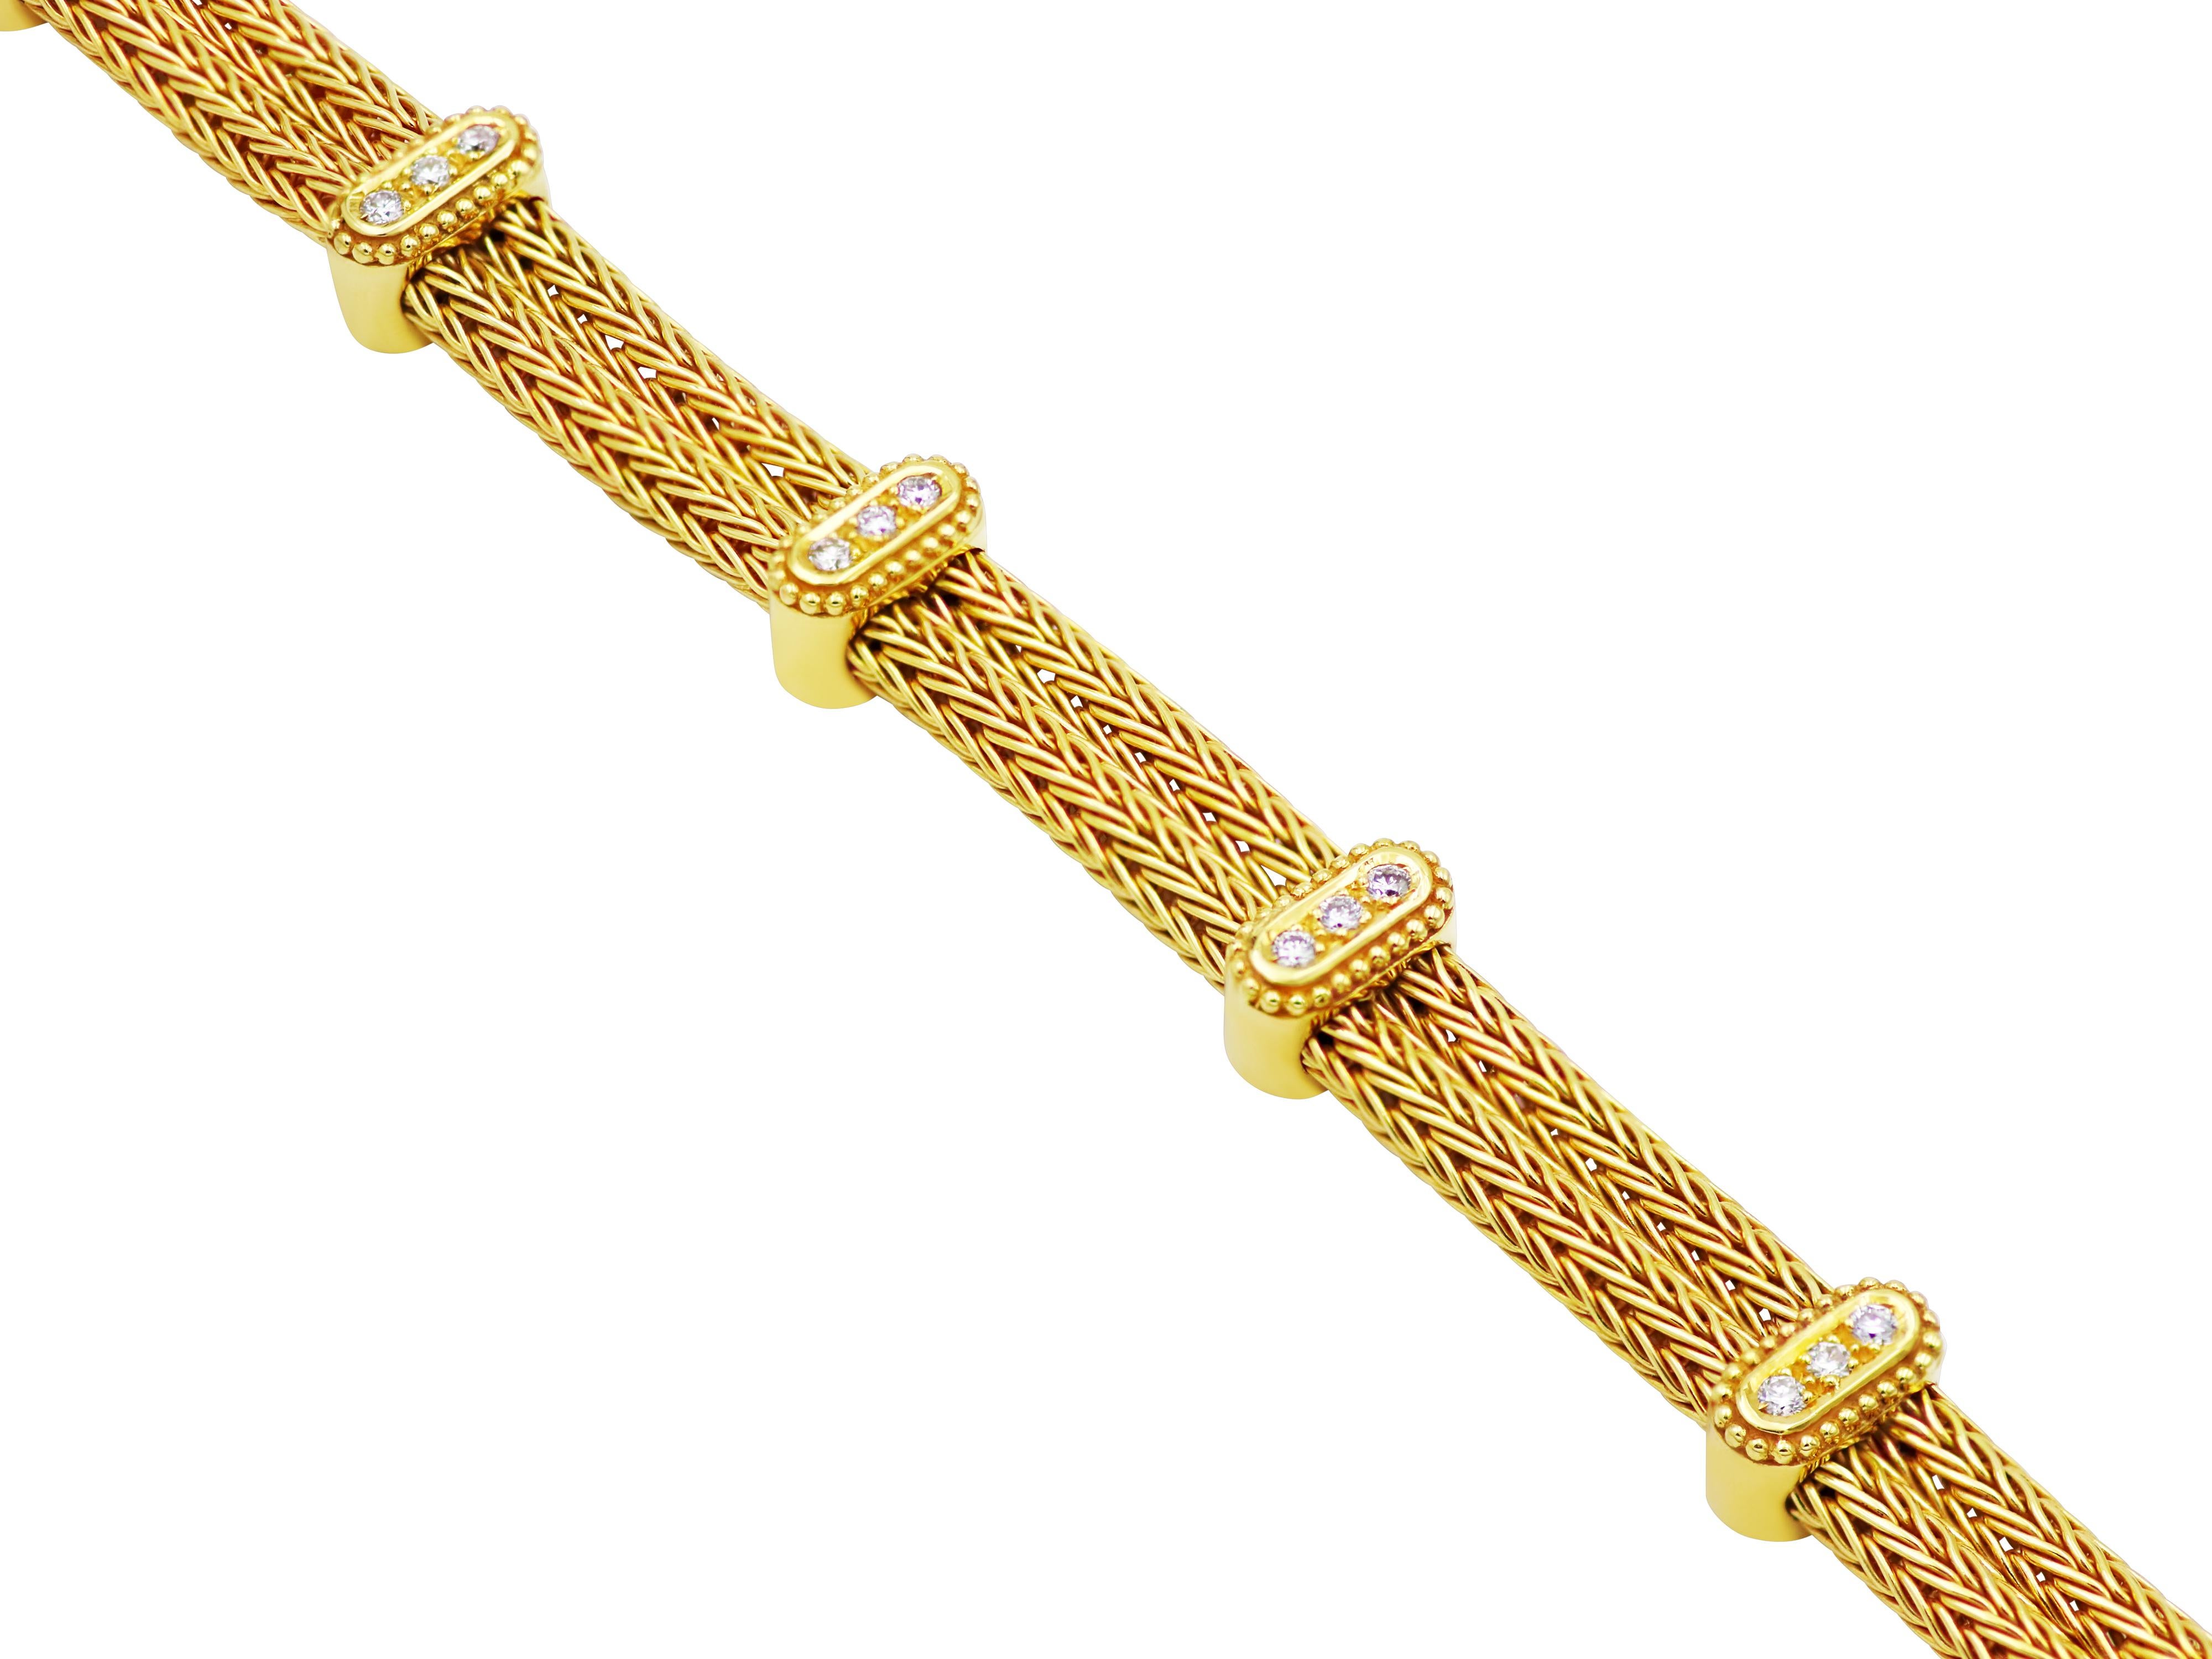 Knitted bracelet from Dimos collection with double rope and diamond bars. A world known workmanship of ours, with hours of knitting wire ending up in a double safety box clasp. The whole bracelet is decorated with gold bars sets with 0.31 carats